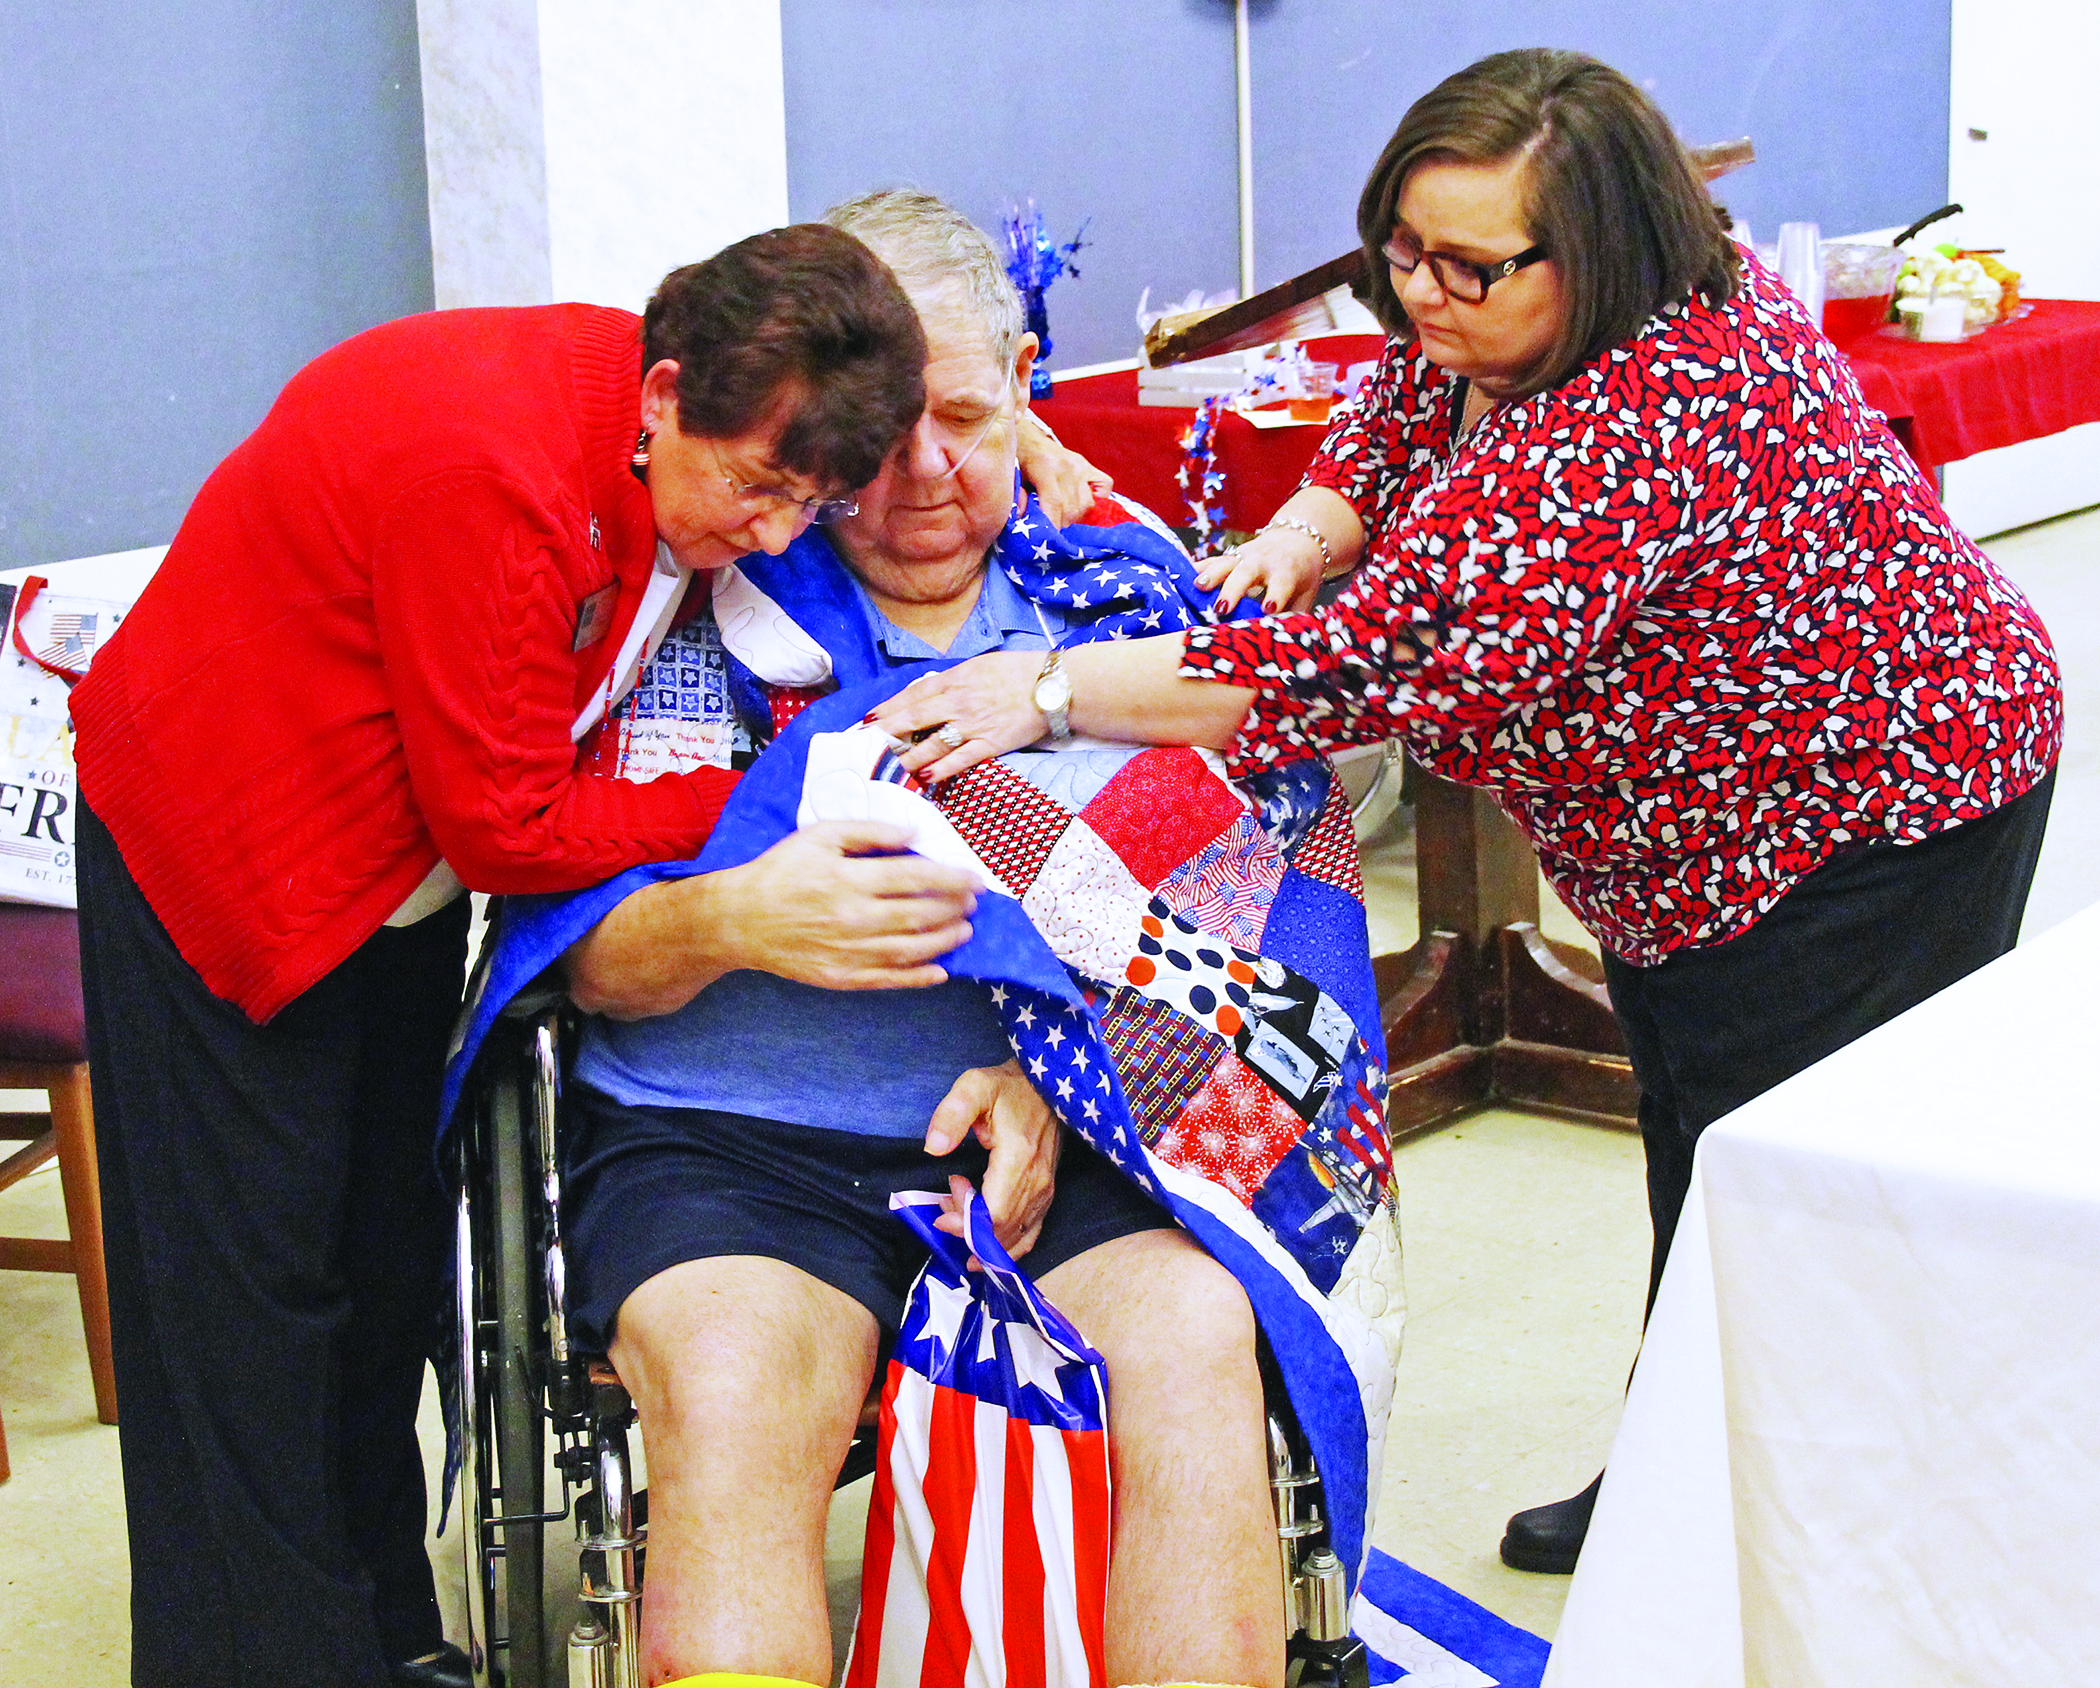 Quilts of Valor volunteer Stamie Cline (left) embraces United States Air Force veteran and Brian Center resident Ephraim “E.K.” Brown as Brian Center Administrator Shelley Tinsley helps wrap Brown in his Quilt of Valor. Brown, 67, is a highly decorated veteran who served more than 20 years in the Air Force, including three tours of duty in Germany. (Cory Spiers/MNJ)